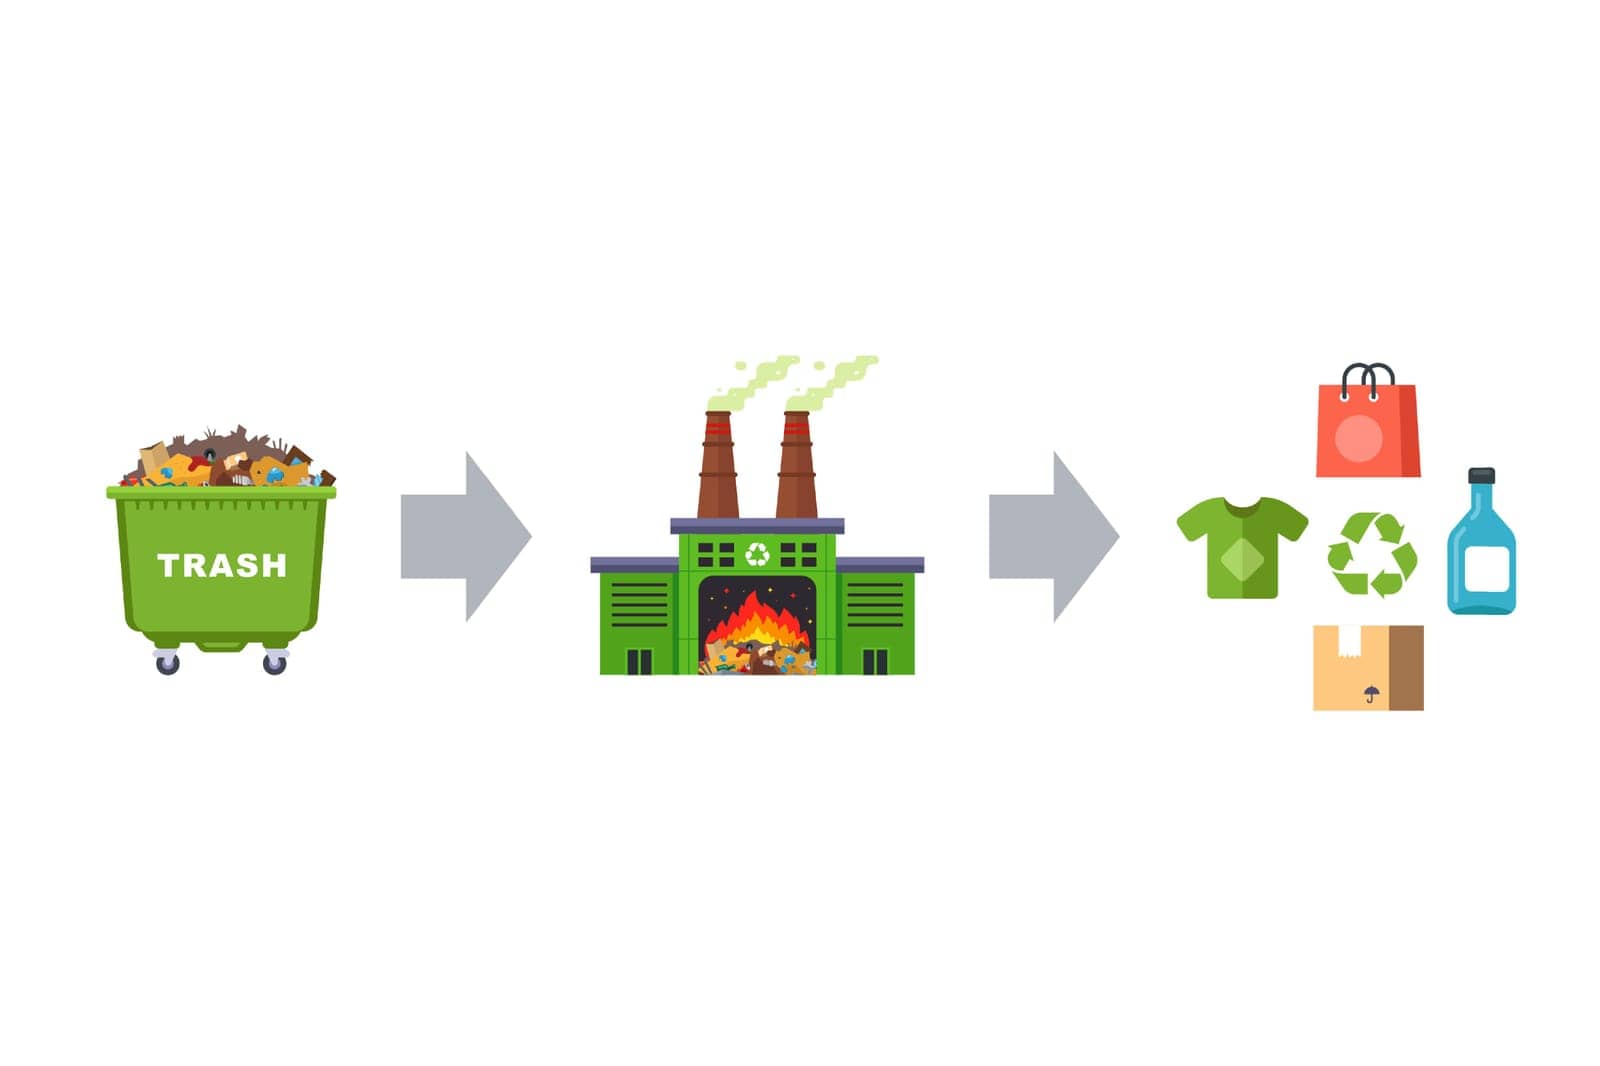 scheme for recycling waste into consumer goods. flat vector illustration.